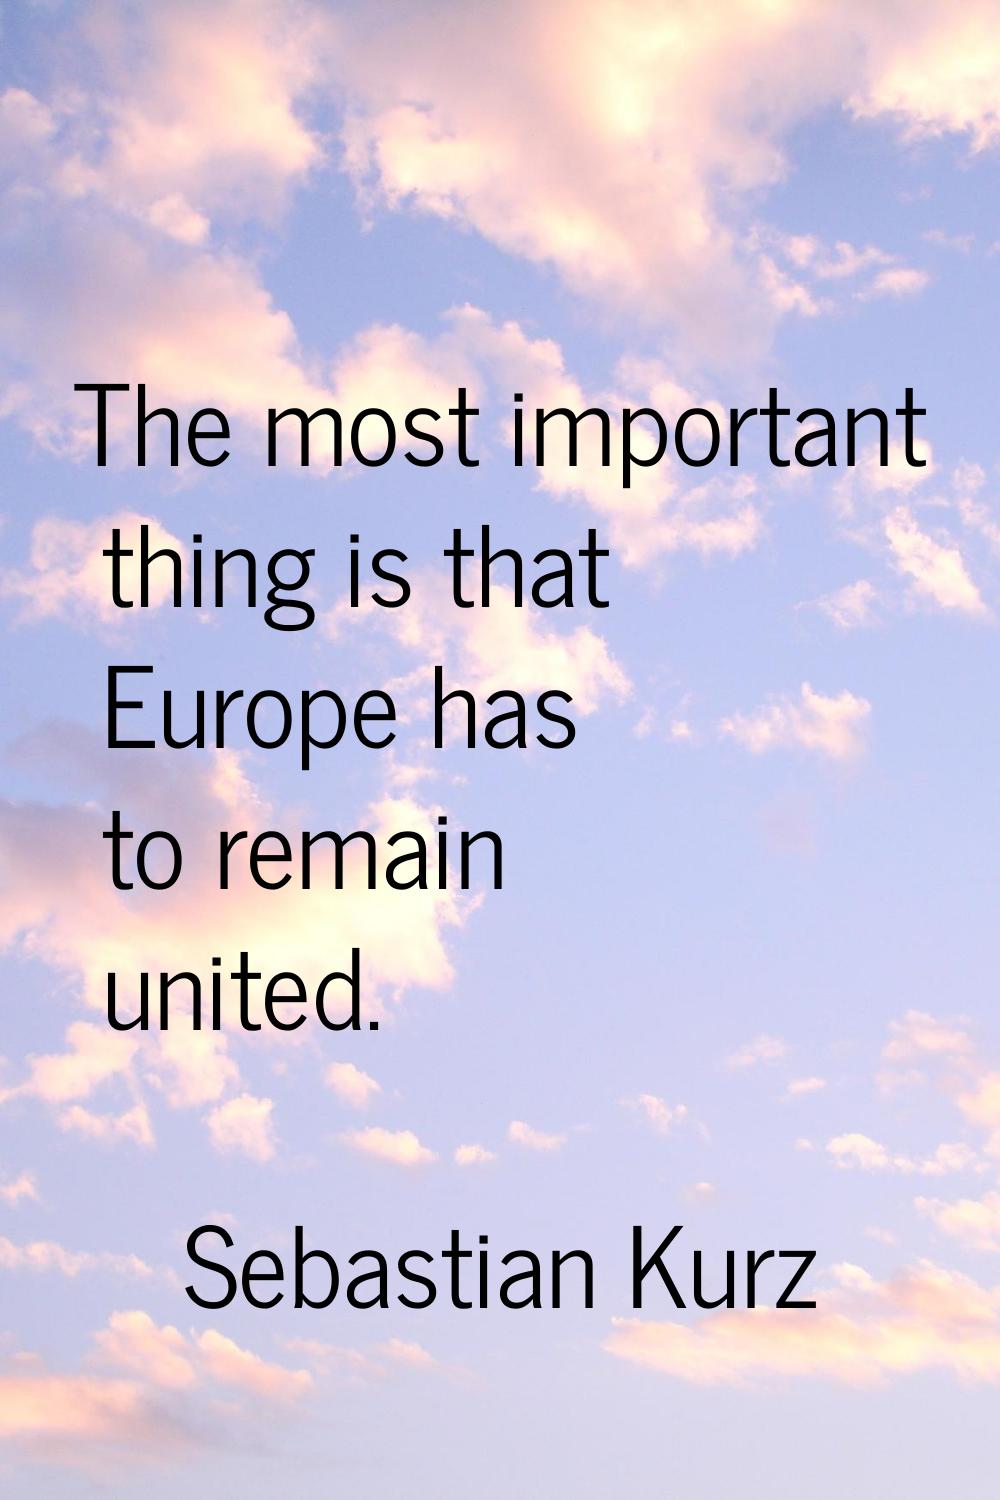 The most important thing is that Europe has to remain united.